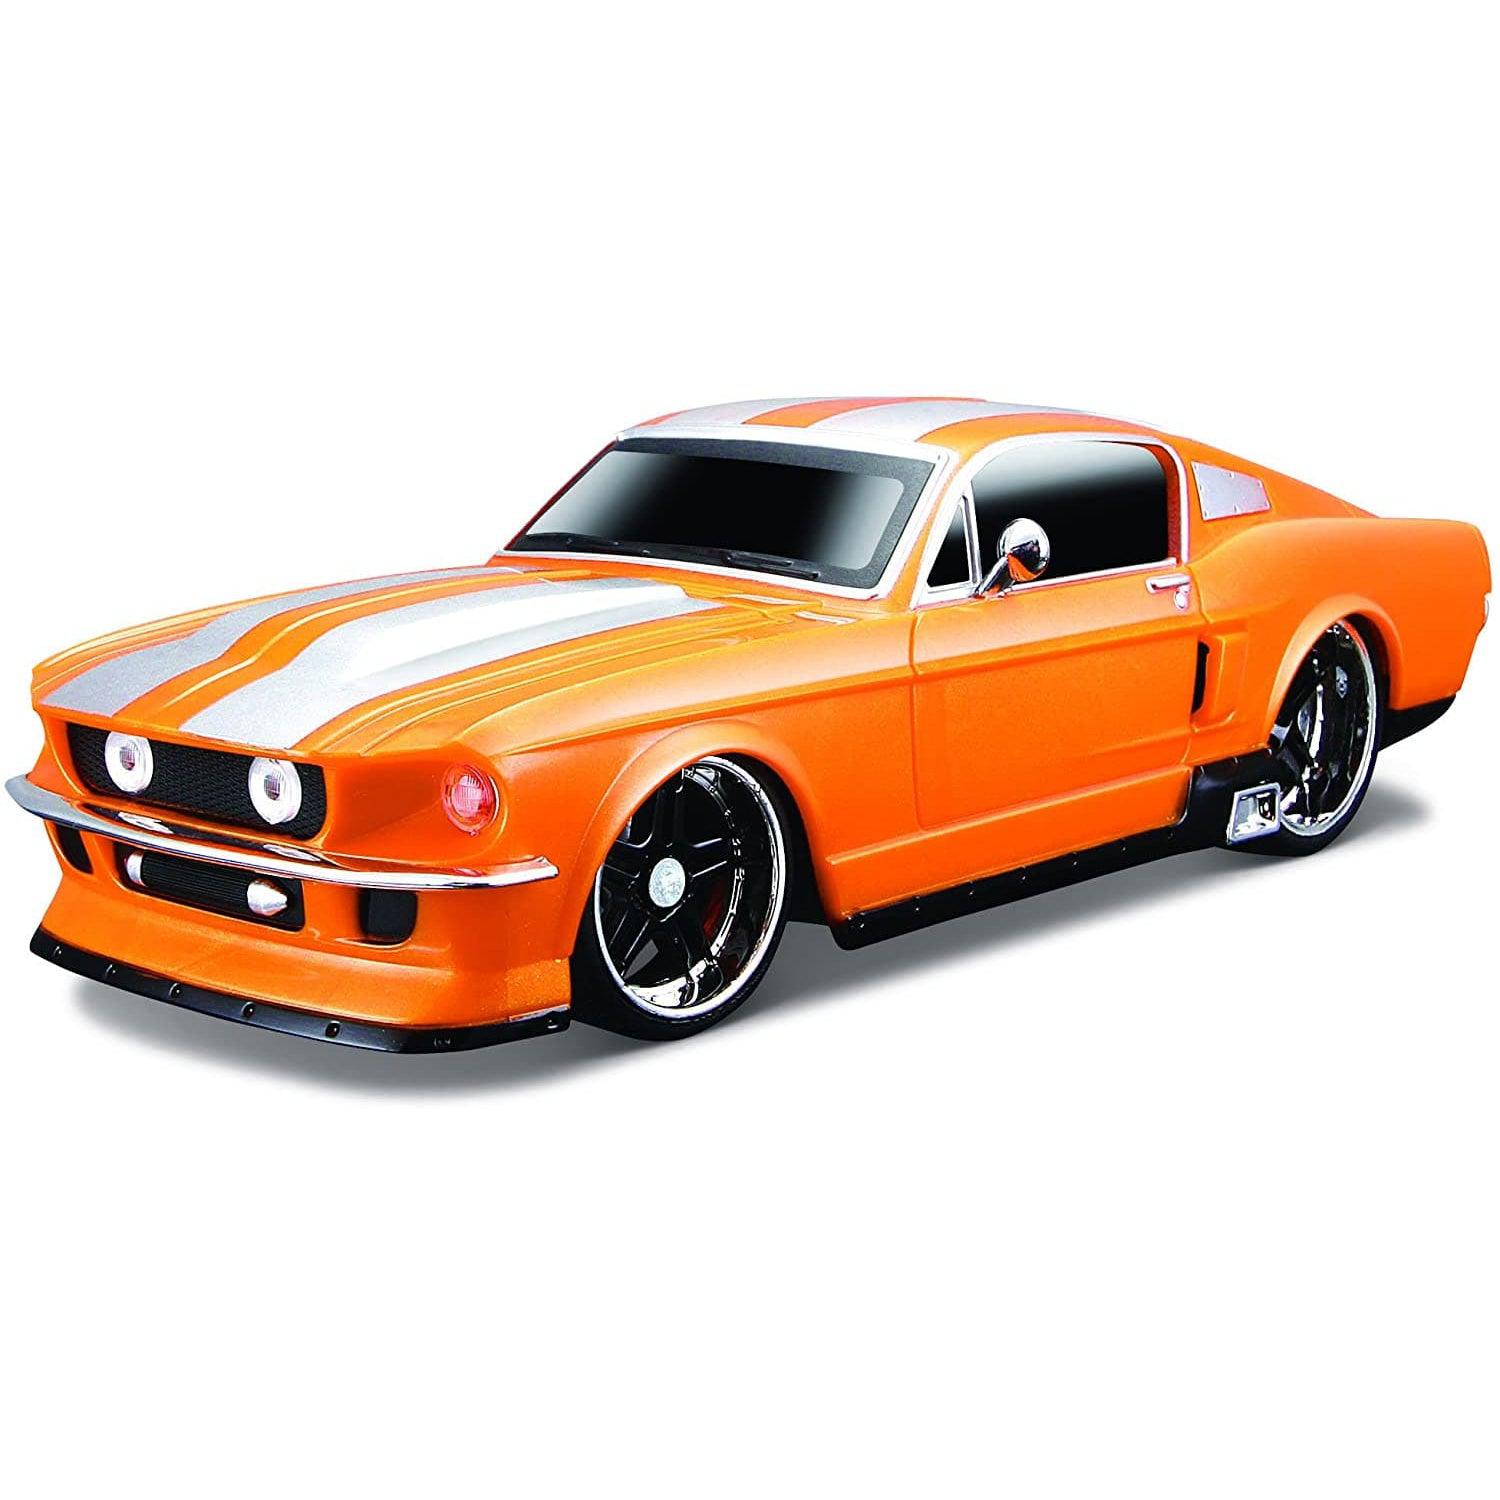 Maisto-R/C 1:24 1967 Ford Mustang GT-81520-Legacy Toys